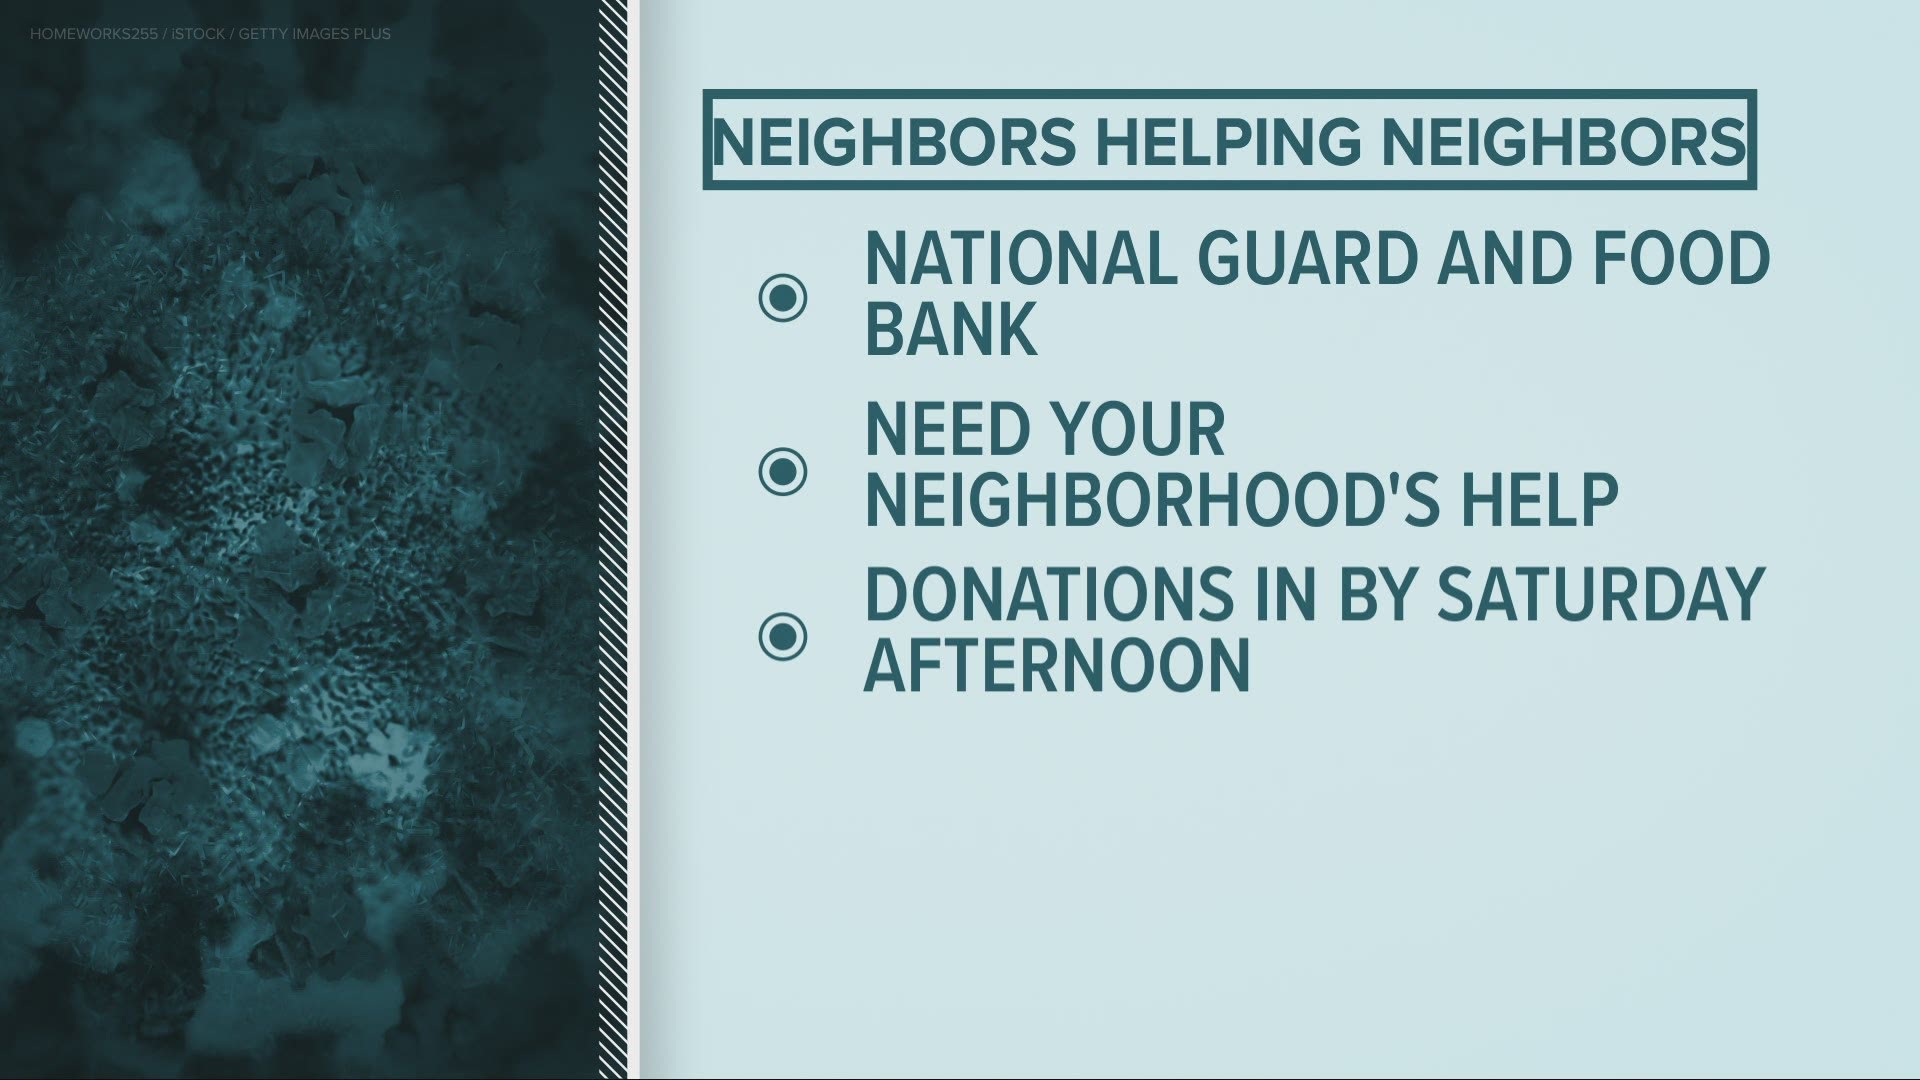 Neighbors helping neighbors in the St. Louis area